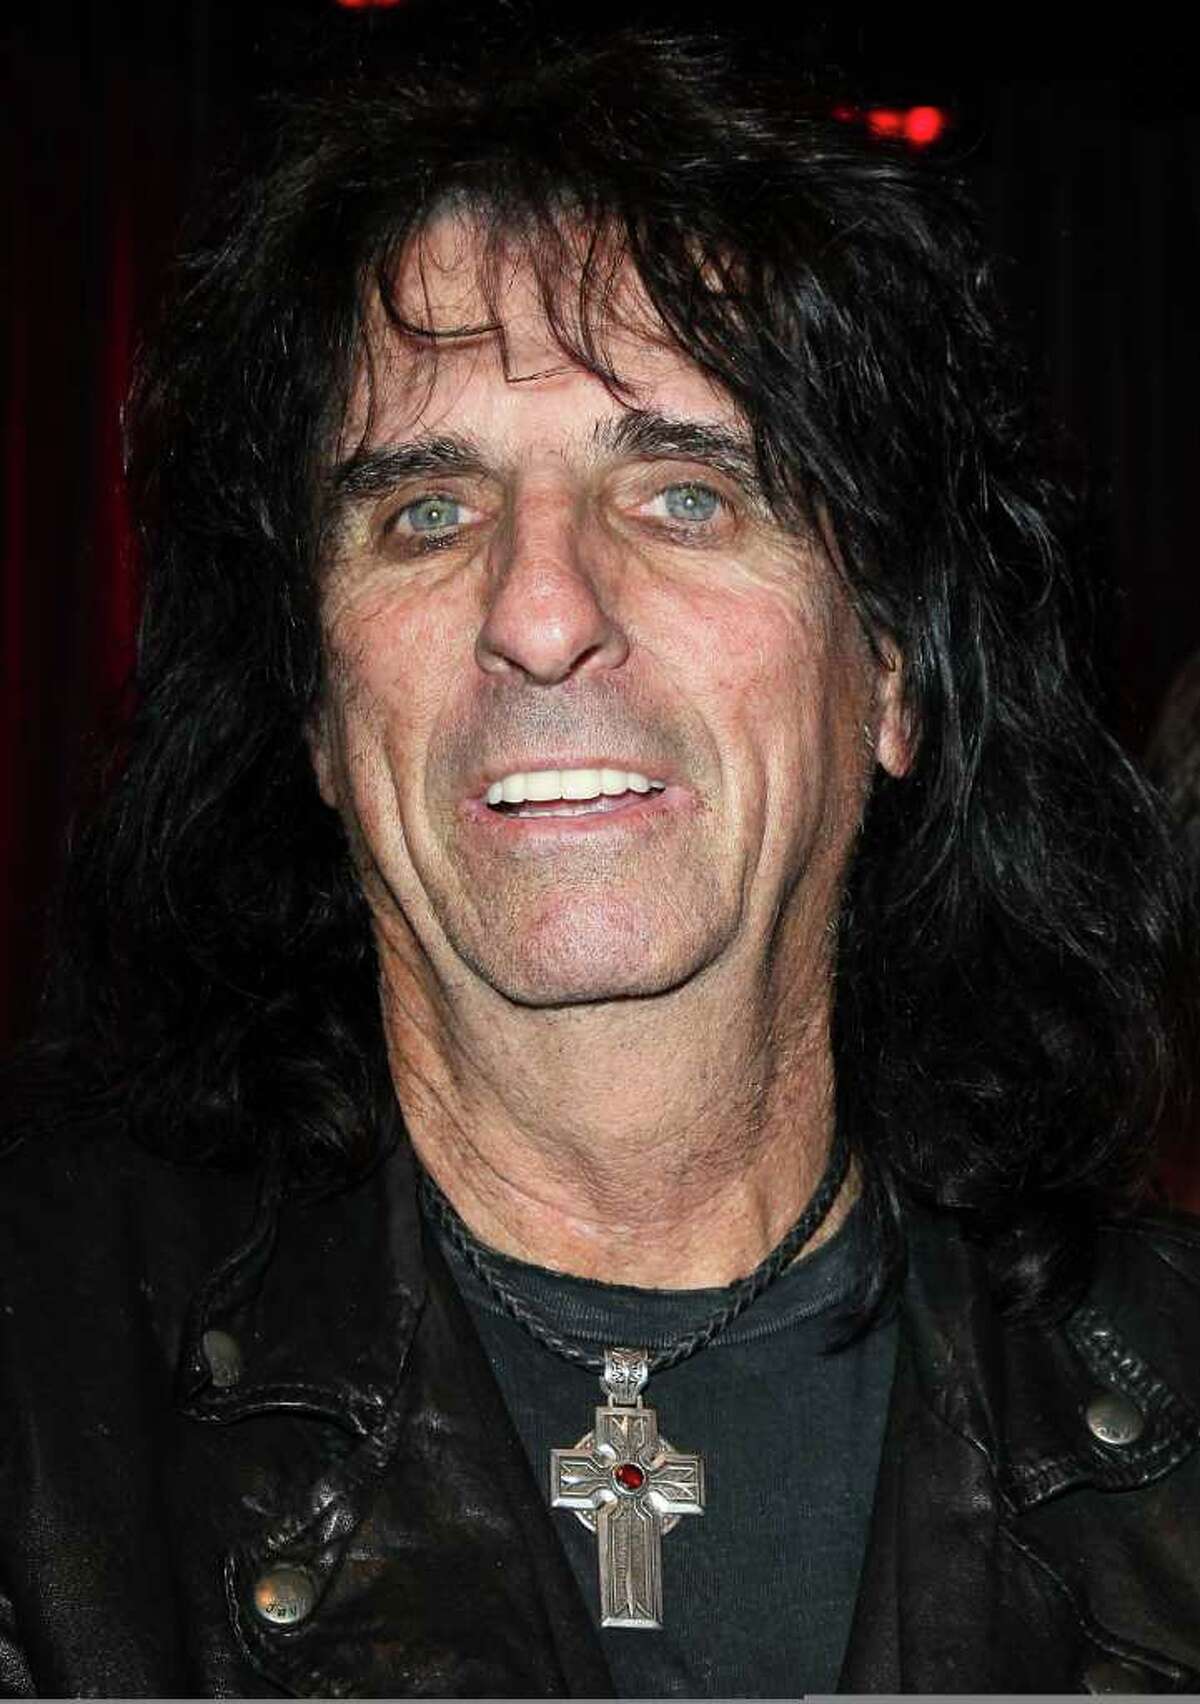 LOS ANGELES, CA - FEBRUARY 15: Recording artist Alice Cooper attends the 4th Annual Revolver Golden God Awards nominees announcement at the GRAMMY Museum on February 15, 2012 in Los Angeles, California. (Photo by David Livingston/Getty Images)